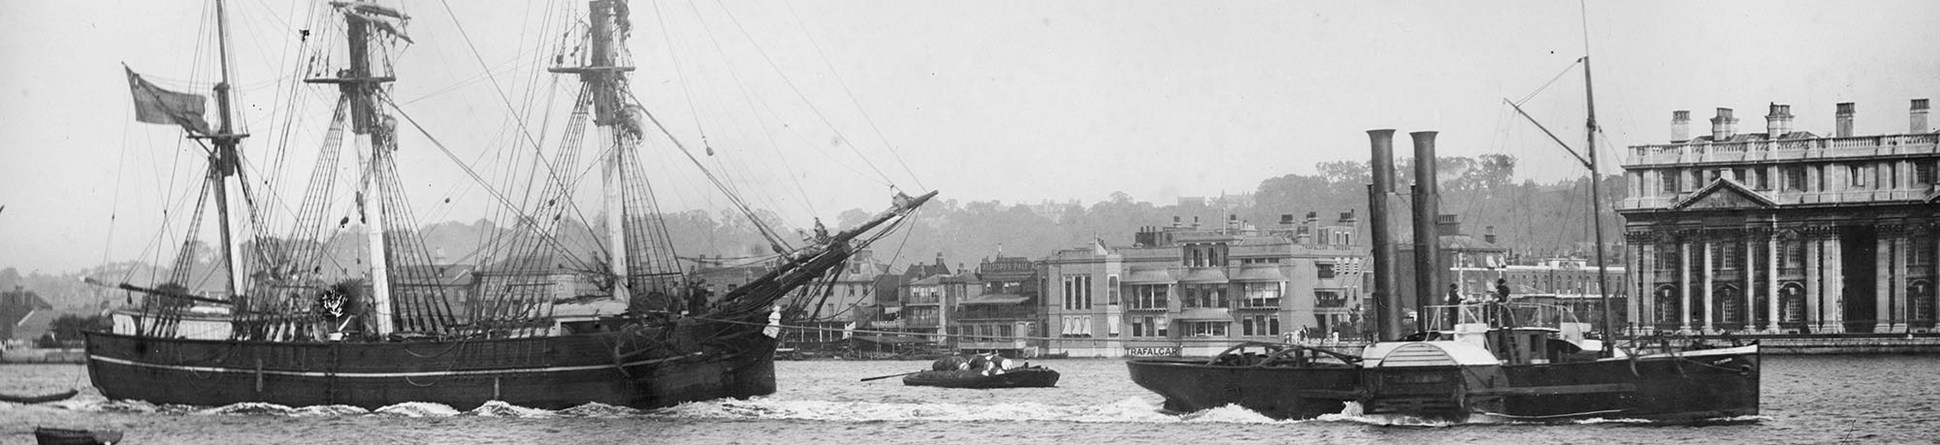 Sailing vessel and paddle steamer on the River Thames at Greenwich